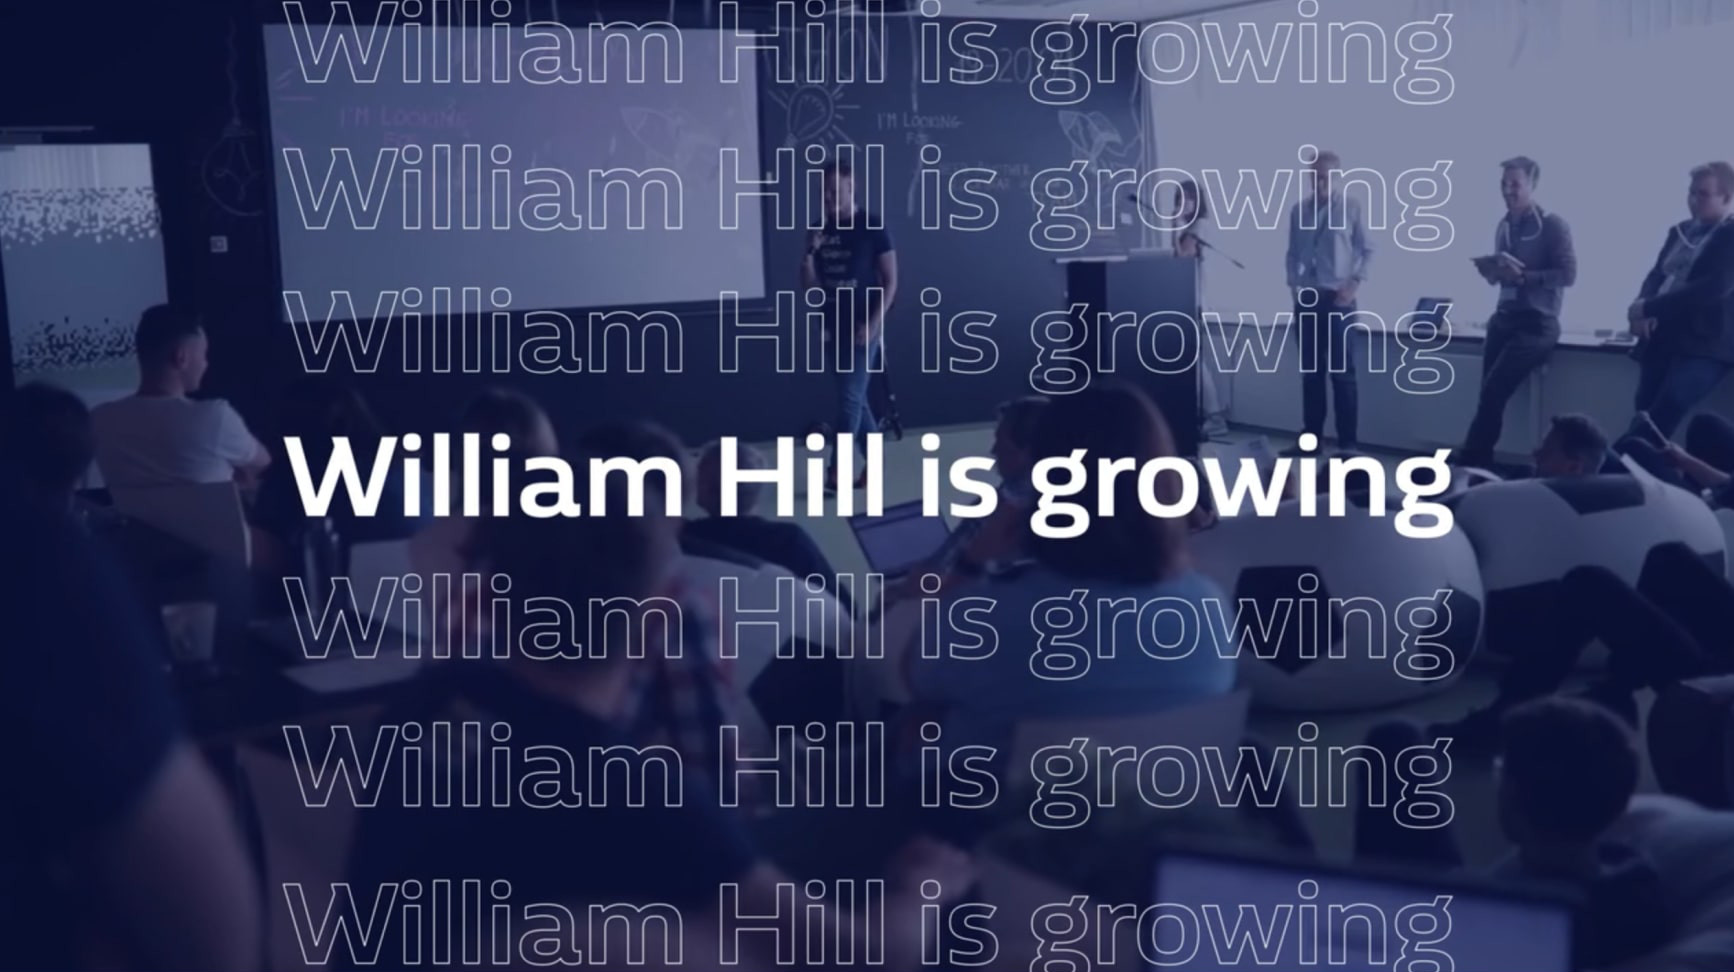 Placeholder for william hill video